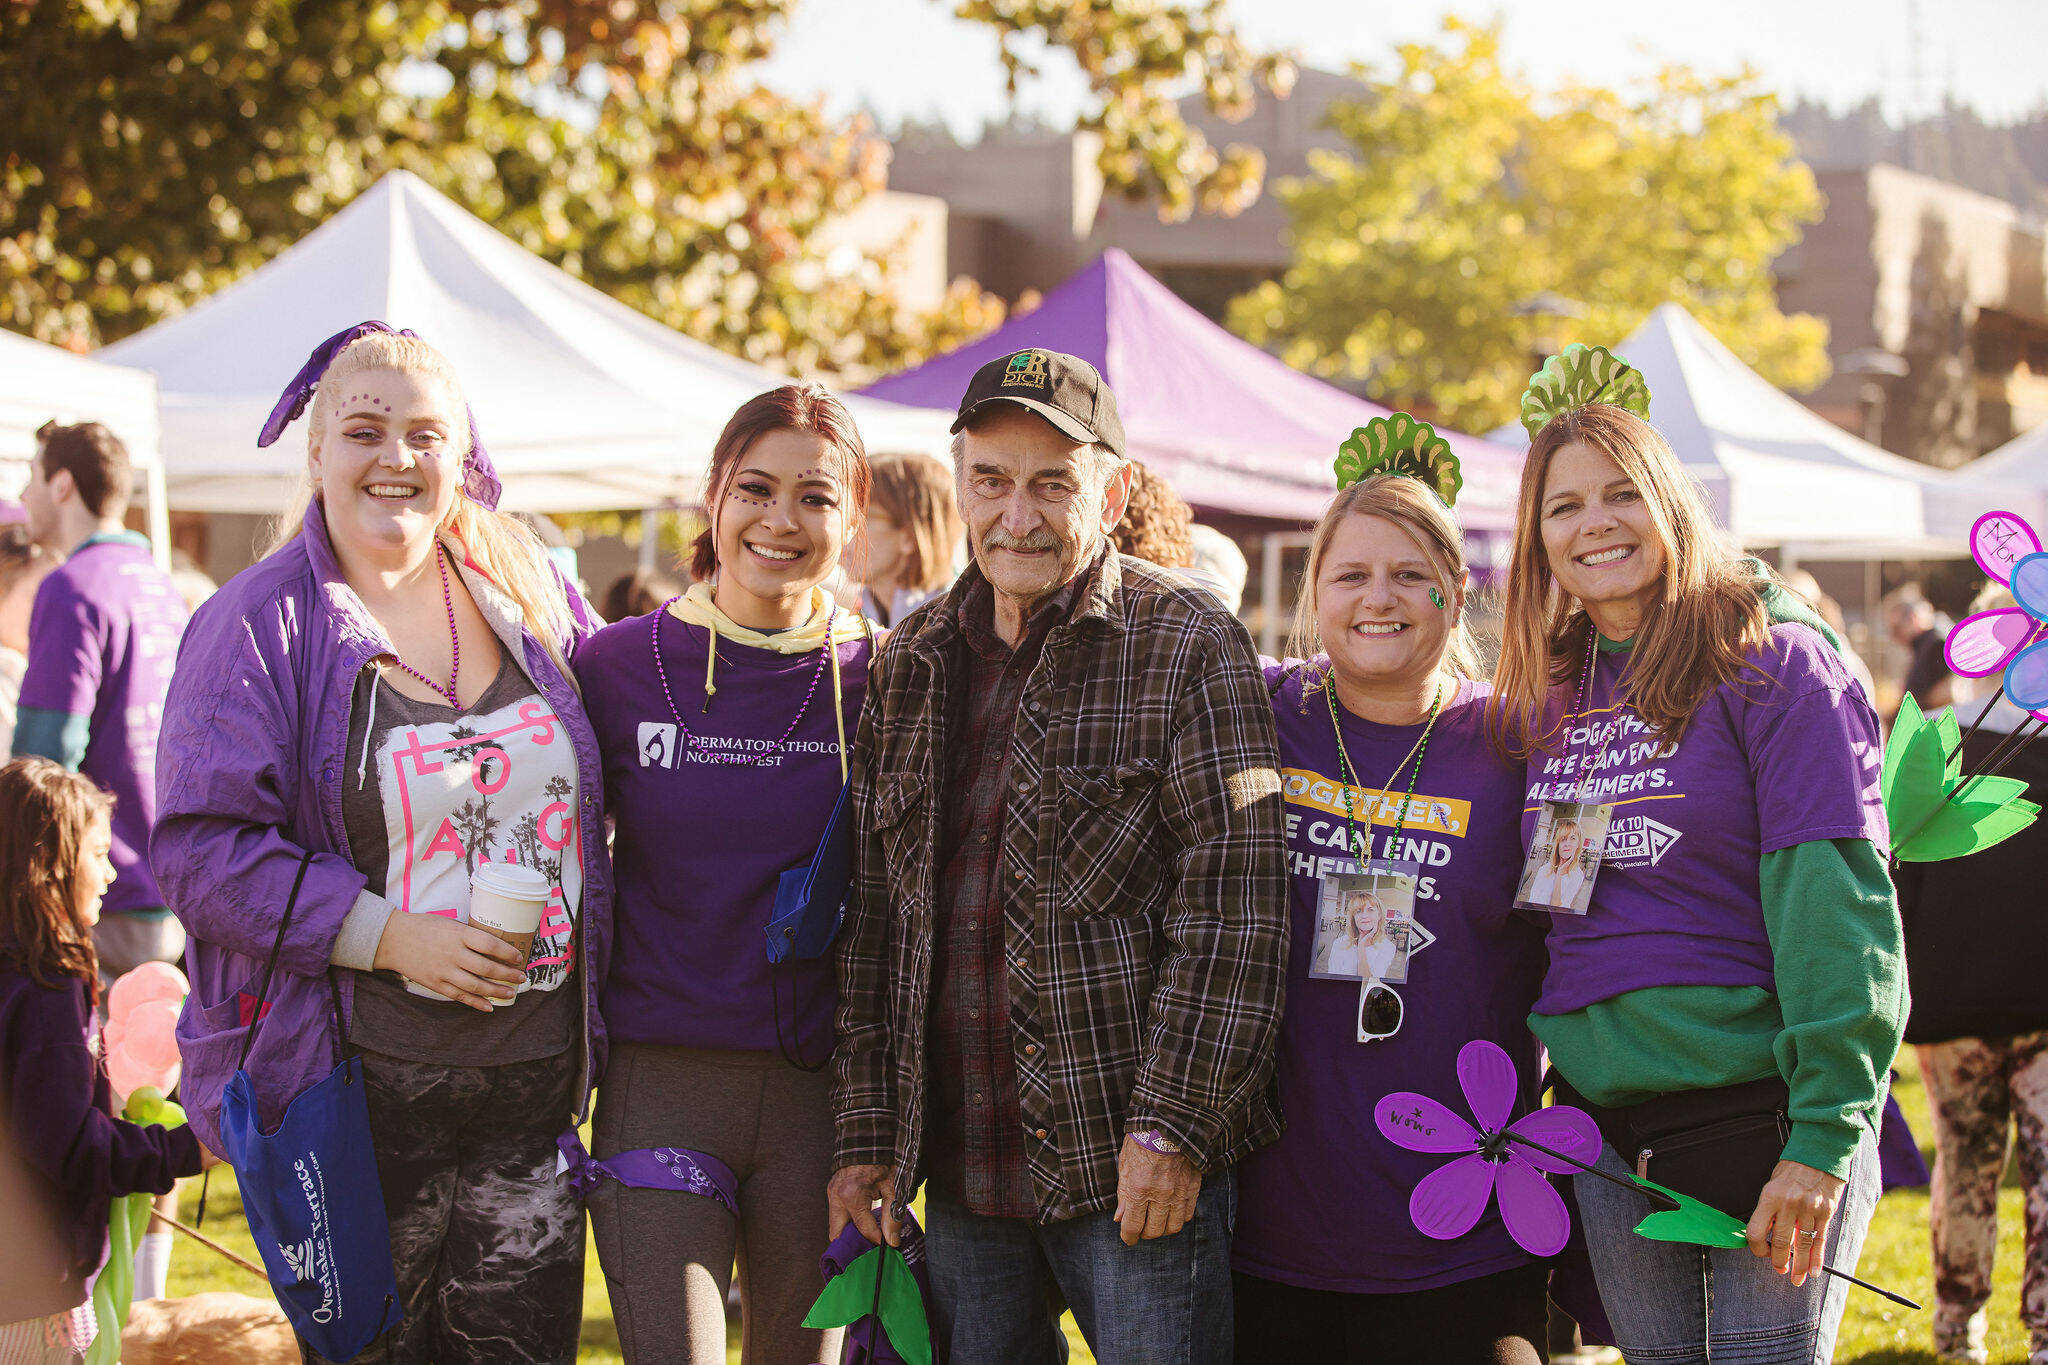 Participants in fundraiser previous event (courtesy of Alzheimer’s Association Washington State Chapter)